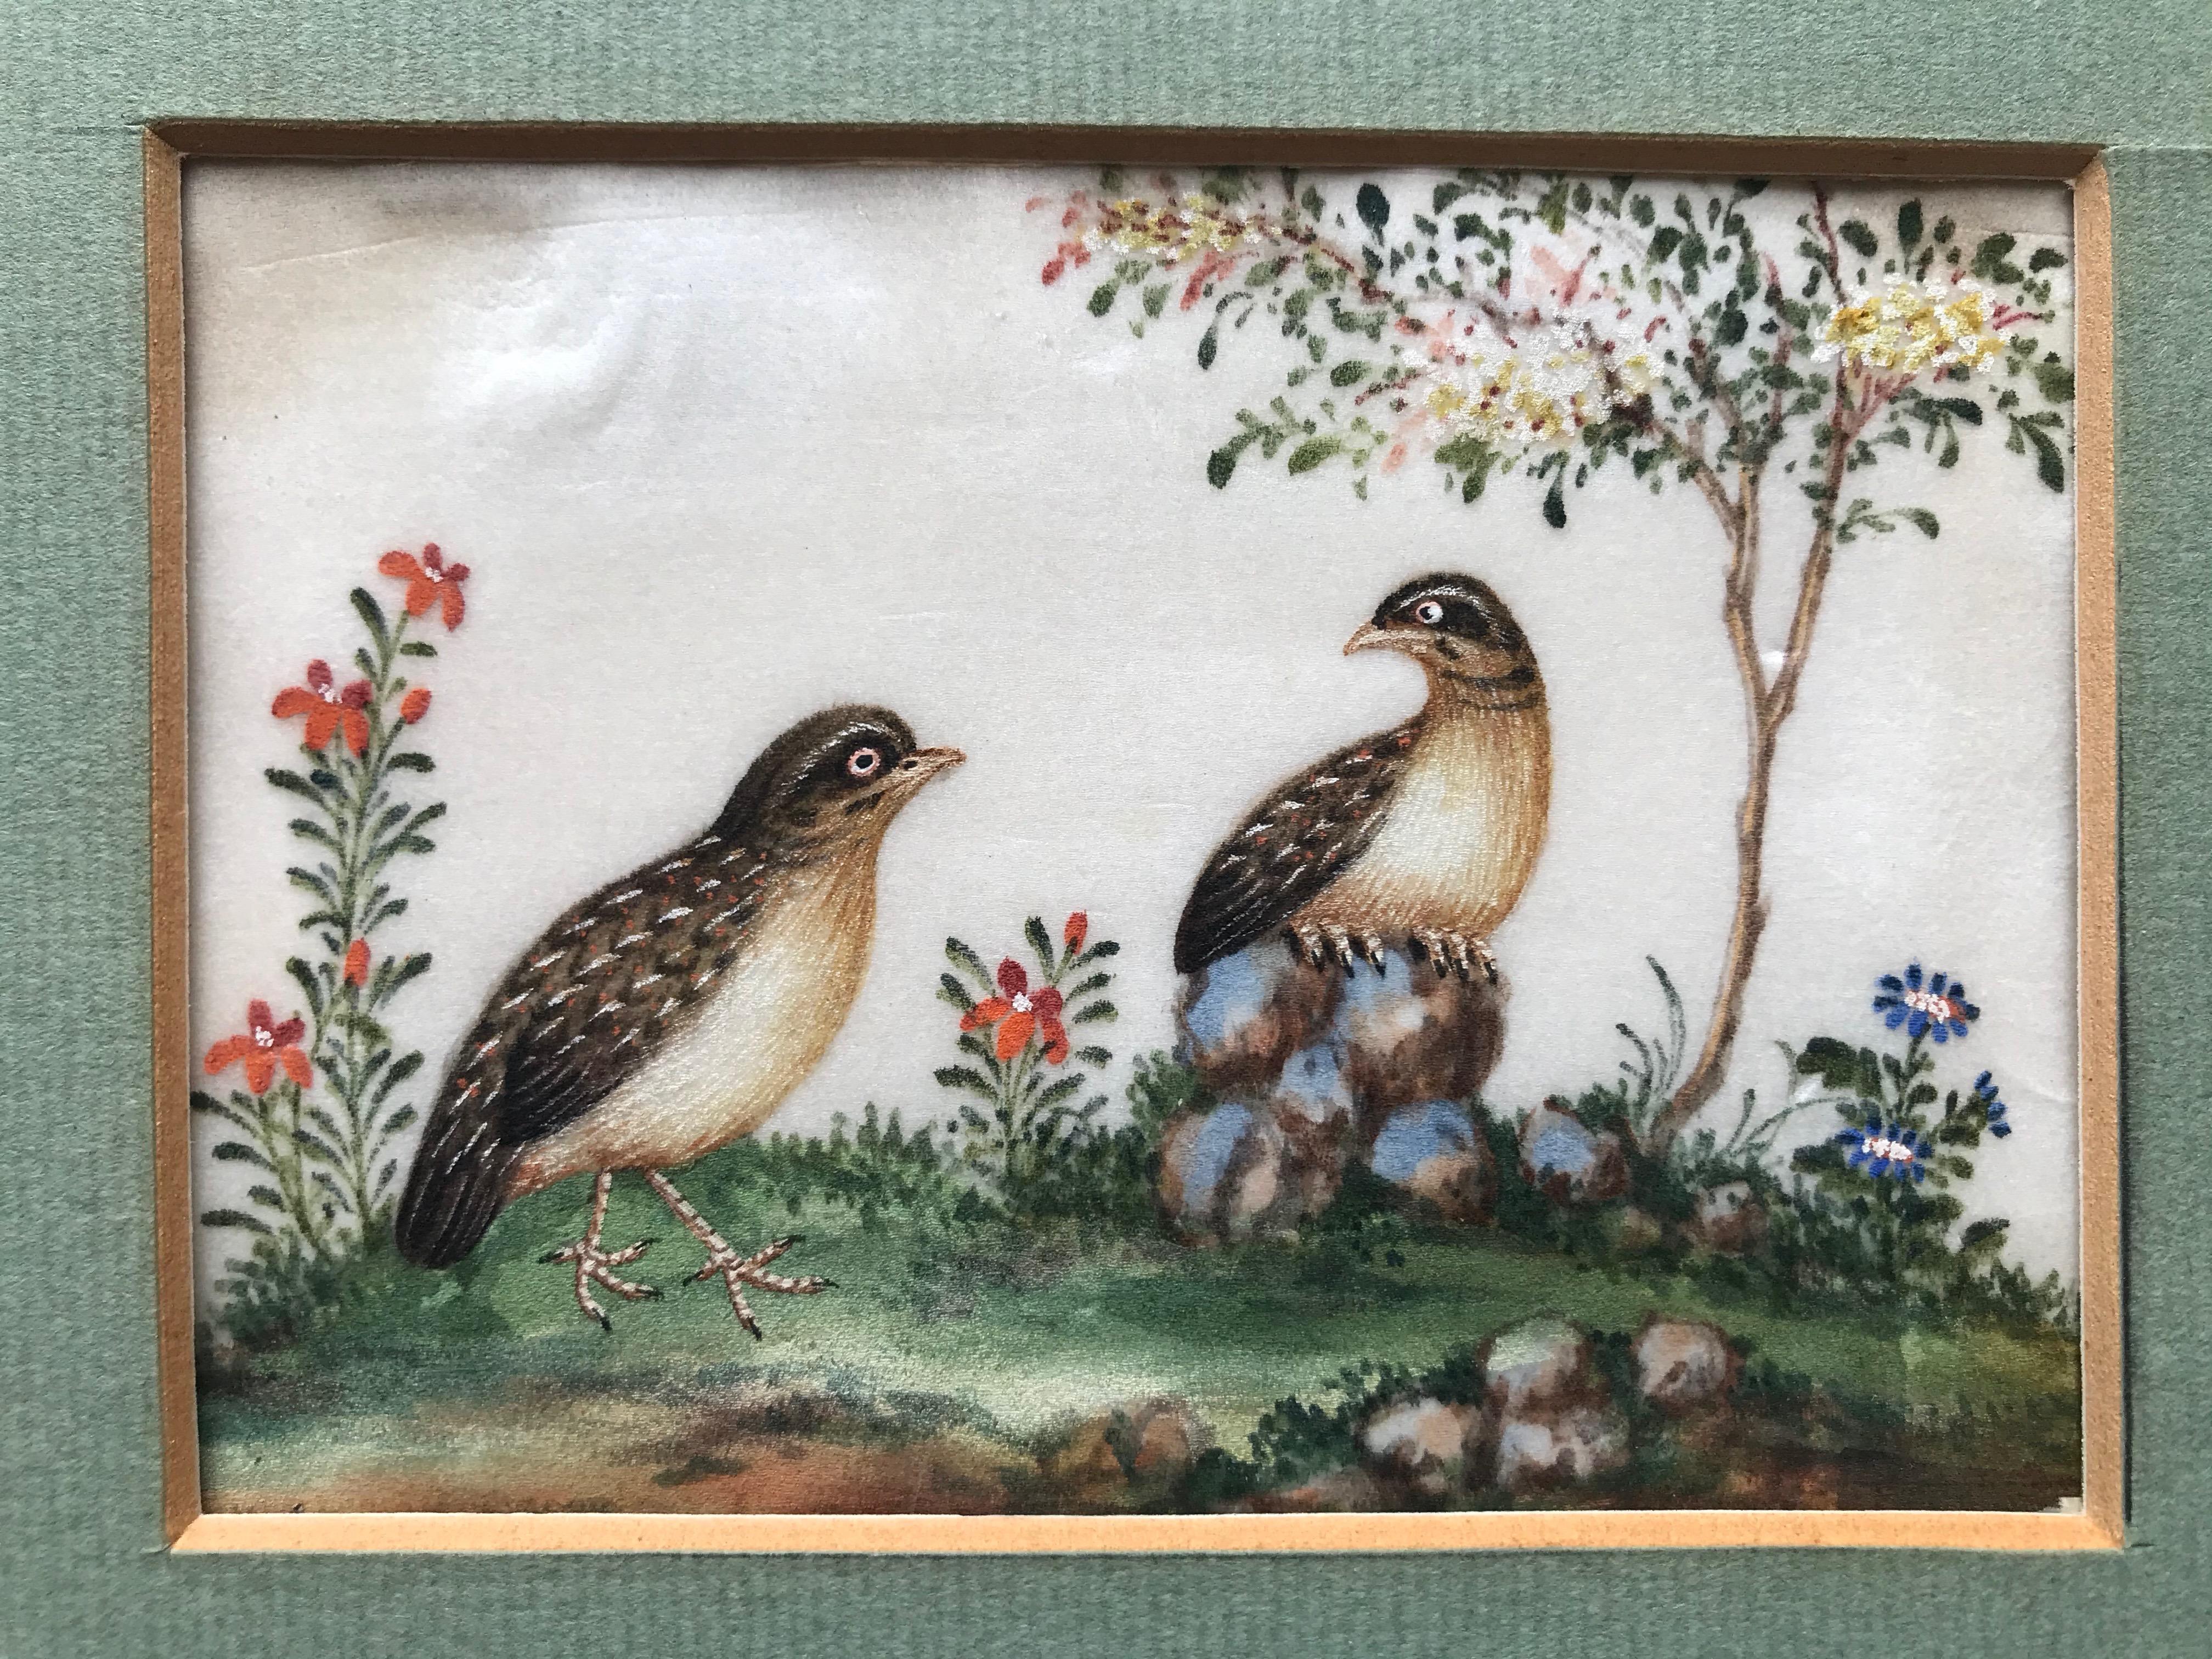 Three 19th Century Chinese Export Rice Pith Paper watercolors of birds - Naturalistic Art by 19th Century Chinese school